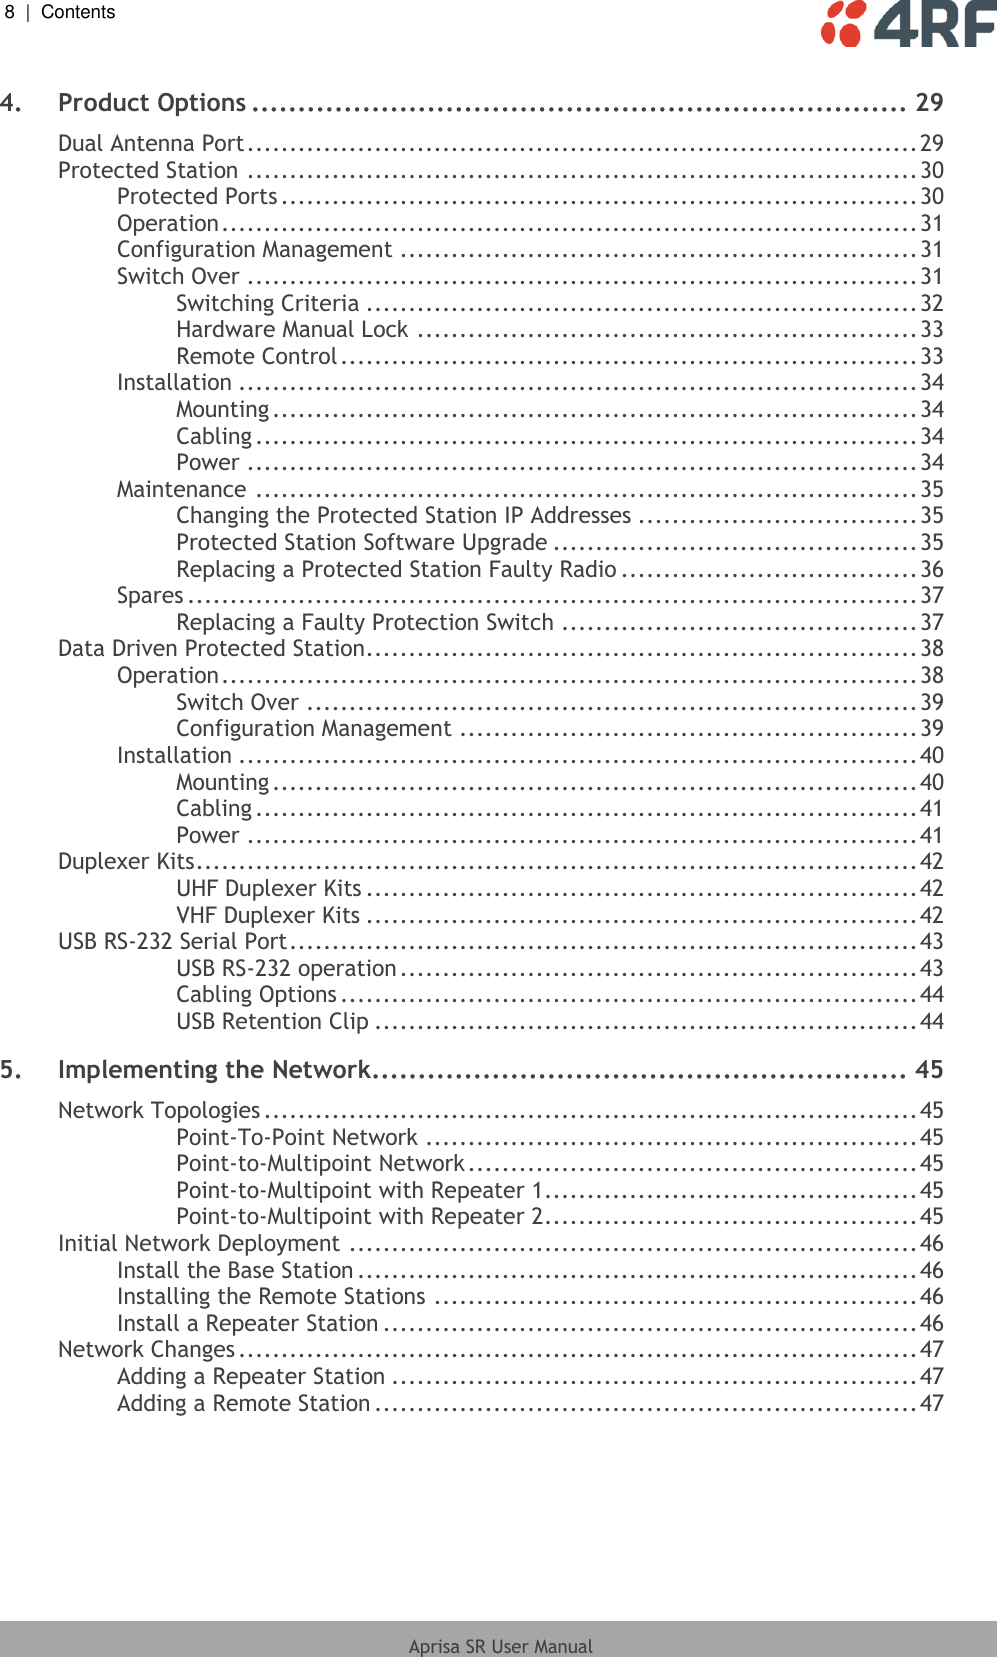 8  |  Contents   Aprisa SR User Manual  4. Product Options ....................................................................... 29 Dual Antenna Port ............................................................................... 29 Protected Station ............................................................................... 30 Protected Ports ........................................................................... 30 Operation .................................................................................. 31 Configuration Management ............................................................. 31 Switch Over ............................................................................... 31 Switching Criteria ................................................................. 32 Hardware Manual Lock ........................................................... 33 Remote Control .................................................................... 33 Installation ................................................................................ 34 Mounting ............................................................................ 34 Cabling .............................................................................. 34 Power ............................................................................... 34 Maintenance .............................................................................. 35 Changing the Protected Station IP Addresses ................................. 35 Protected Station Software Upgrade ........................................... 35 Replacing a Protected Station Faulty Radio ................................... 36 Spares ...................................................................................... 37 Replacing a Faulty Protection Switch .......................................... 37 Data Driven Protected Station................................................................. 38 Operation .................................................................................. 38 Switch Over ........................................................................ 39 Configuration Management ...................................................... 39 Installation ................................................................................ 40 Mounting ............................................................................ 40 Cabling .............................................................................. 41 Power ............................................................................... 41 Duplexer Kits ..................................................................................... 42 UHF Duplexer Kits ................................................................. 42 VHF Duplexer Kits ................................................................. 42 USB RS-232 Serial Port .......................................................................... 43 USB RS-232 operation ............................................................. 43 Cabling Options .................................................................... 44 USB Retention Clip ................................................................ 44 5. Implementing the Network.......................................................... 45 Network Topologies ............................................................................. 45 Point-To-Point Network .......................................................... 45 Point-to-Multipoint Network ..................................................... 45 Point-to-Multipoint with Repeater 1 ............................................ 45 Point-to-Multipoint with Repeater 2 ............................................ 45 Initial Network Deployment ................................................................... 46 Install the Base Station .................................................................. 46 Installing the Remote Stations ......................................................... 46 Install a Repeater Station ............................................................... 46 Network Changes ................................................................................ 47 Adding a Repeater Station .............................................................. 47 Adding a Remote Station ................................................................ 47 